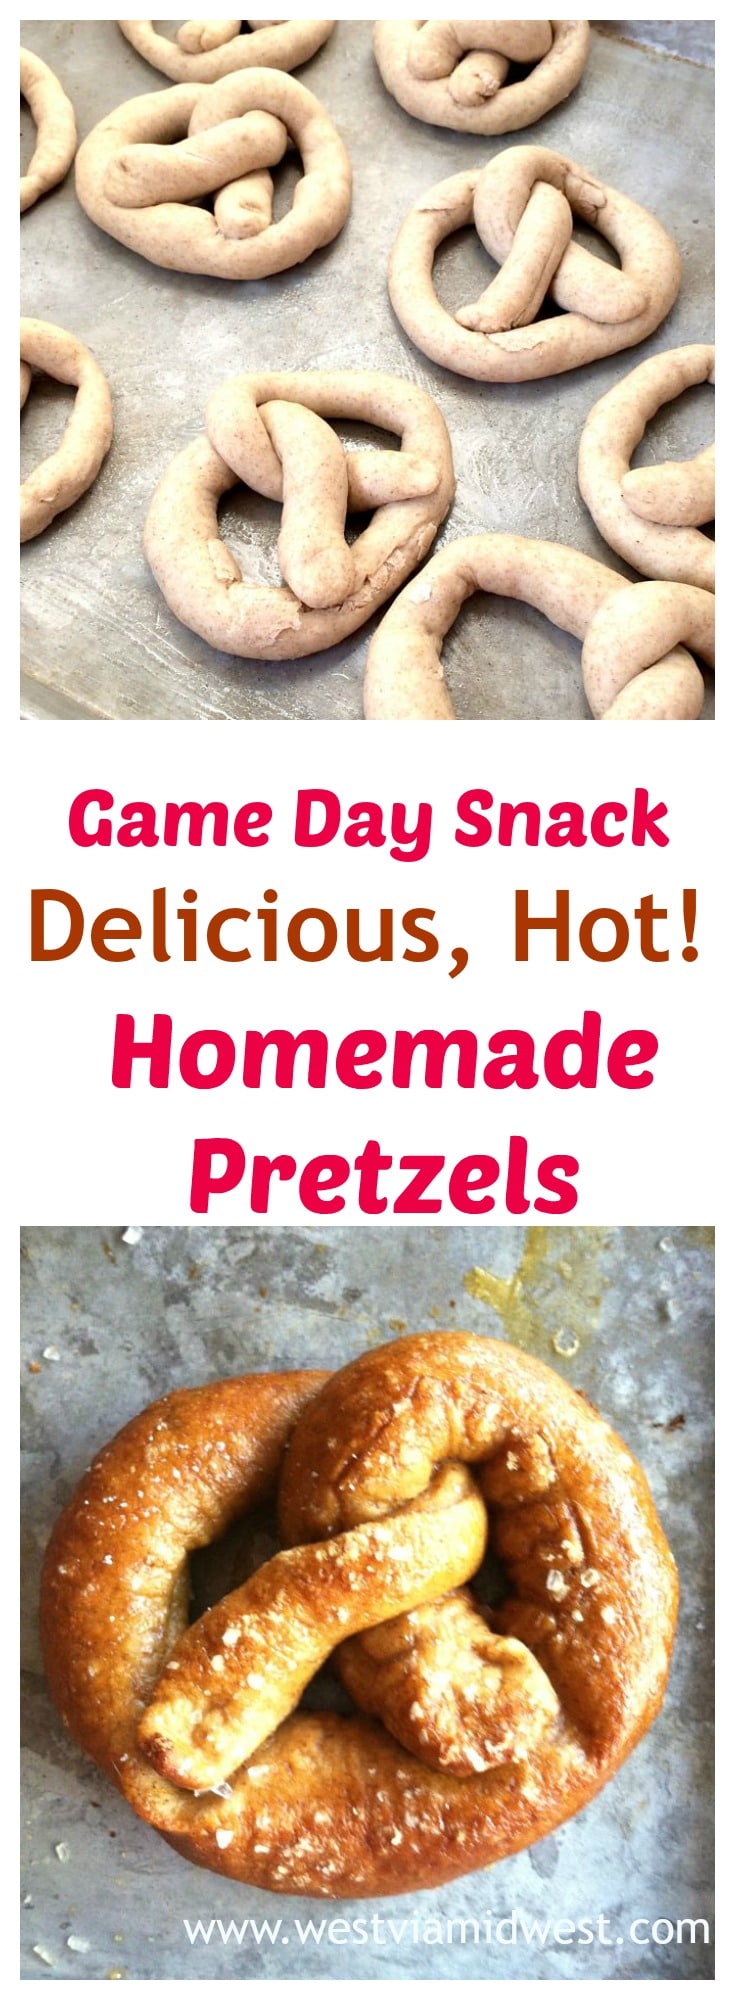 Served Fresh and warm from the oven with a soft flavorful inside and a slightly crisp bite, these Homemade German Pretzels are perfect for when you want something a little more than just chips and dip! https://westviamidwest.com